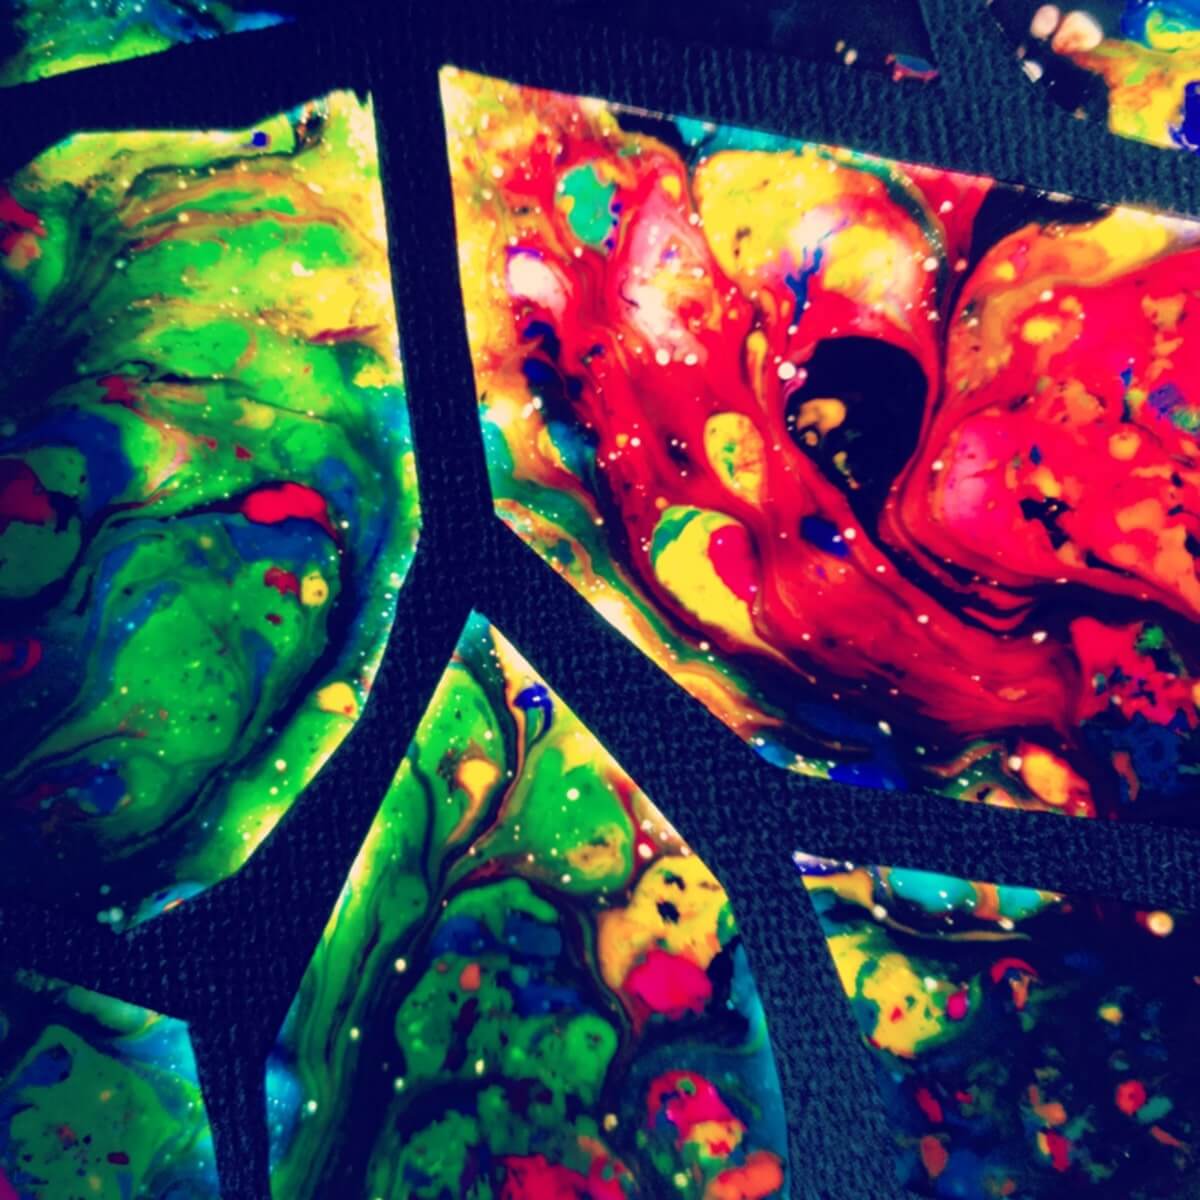 Amazing Colorful Stained Glass Window Using Crayons & Wax Paper